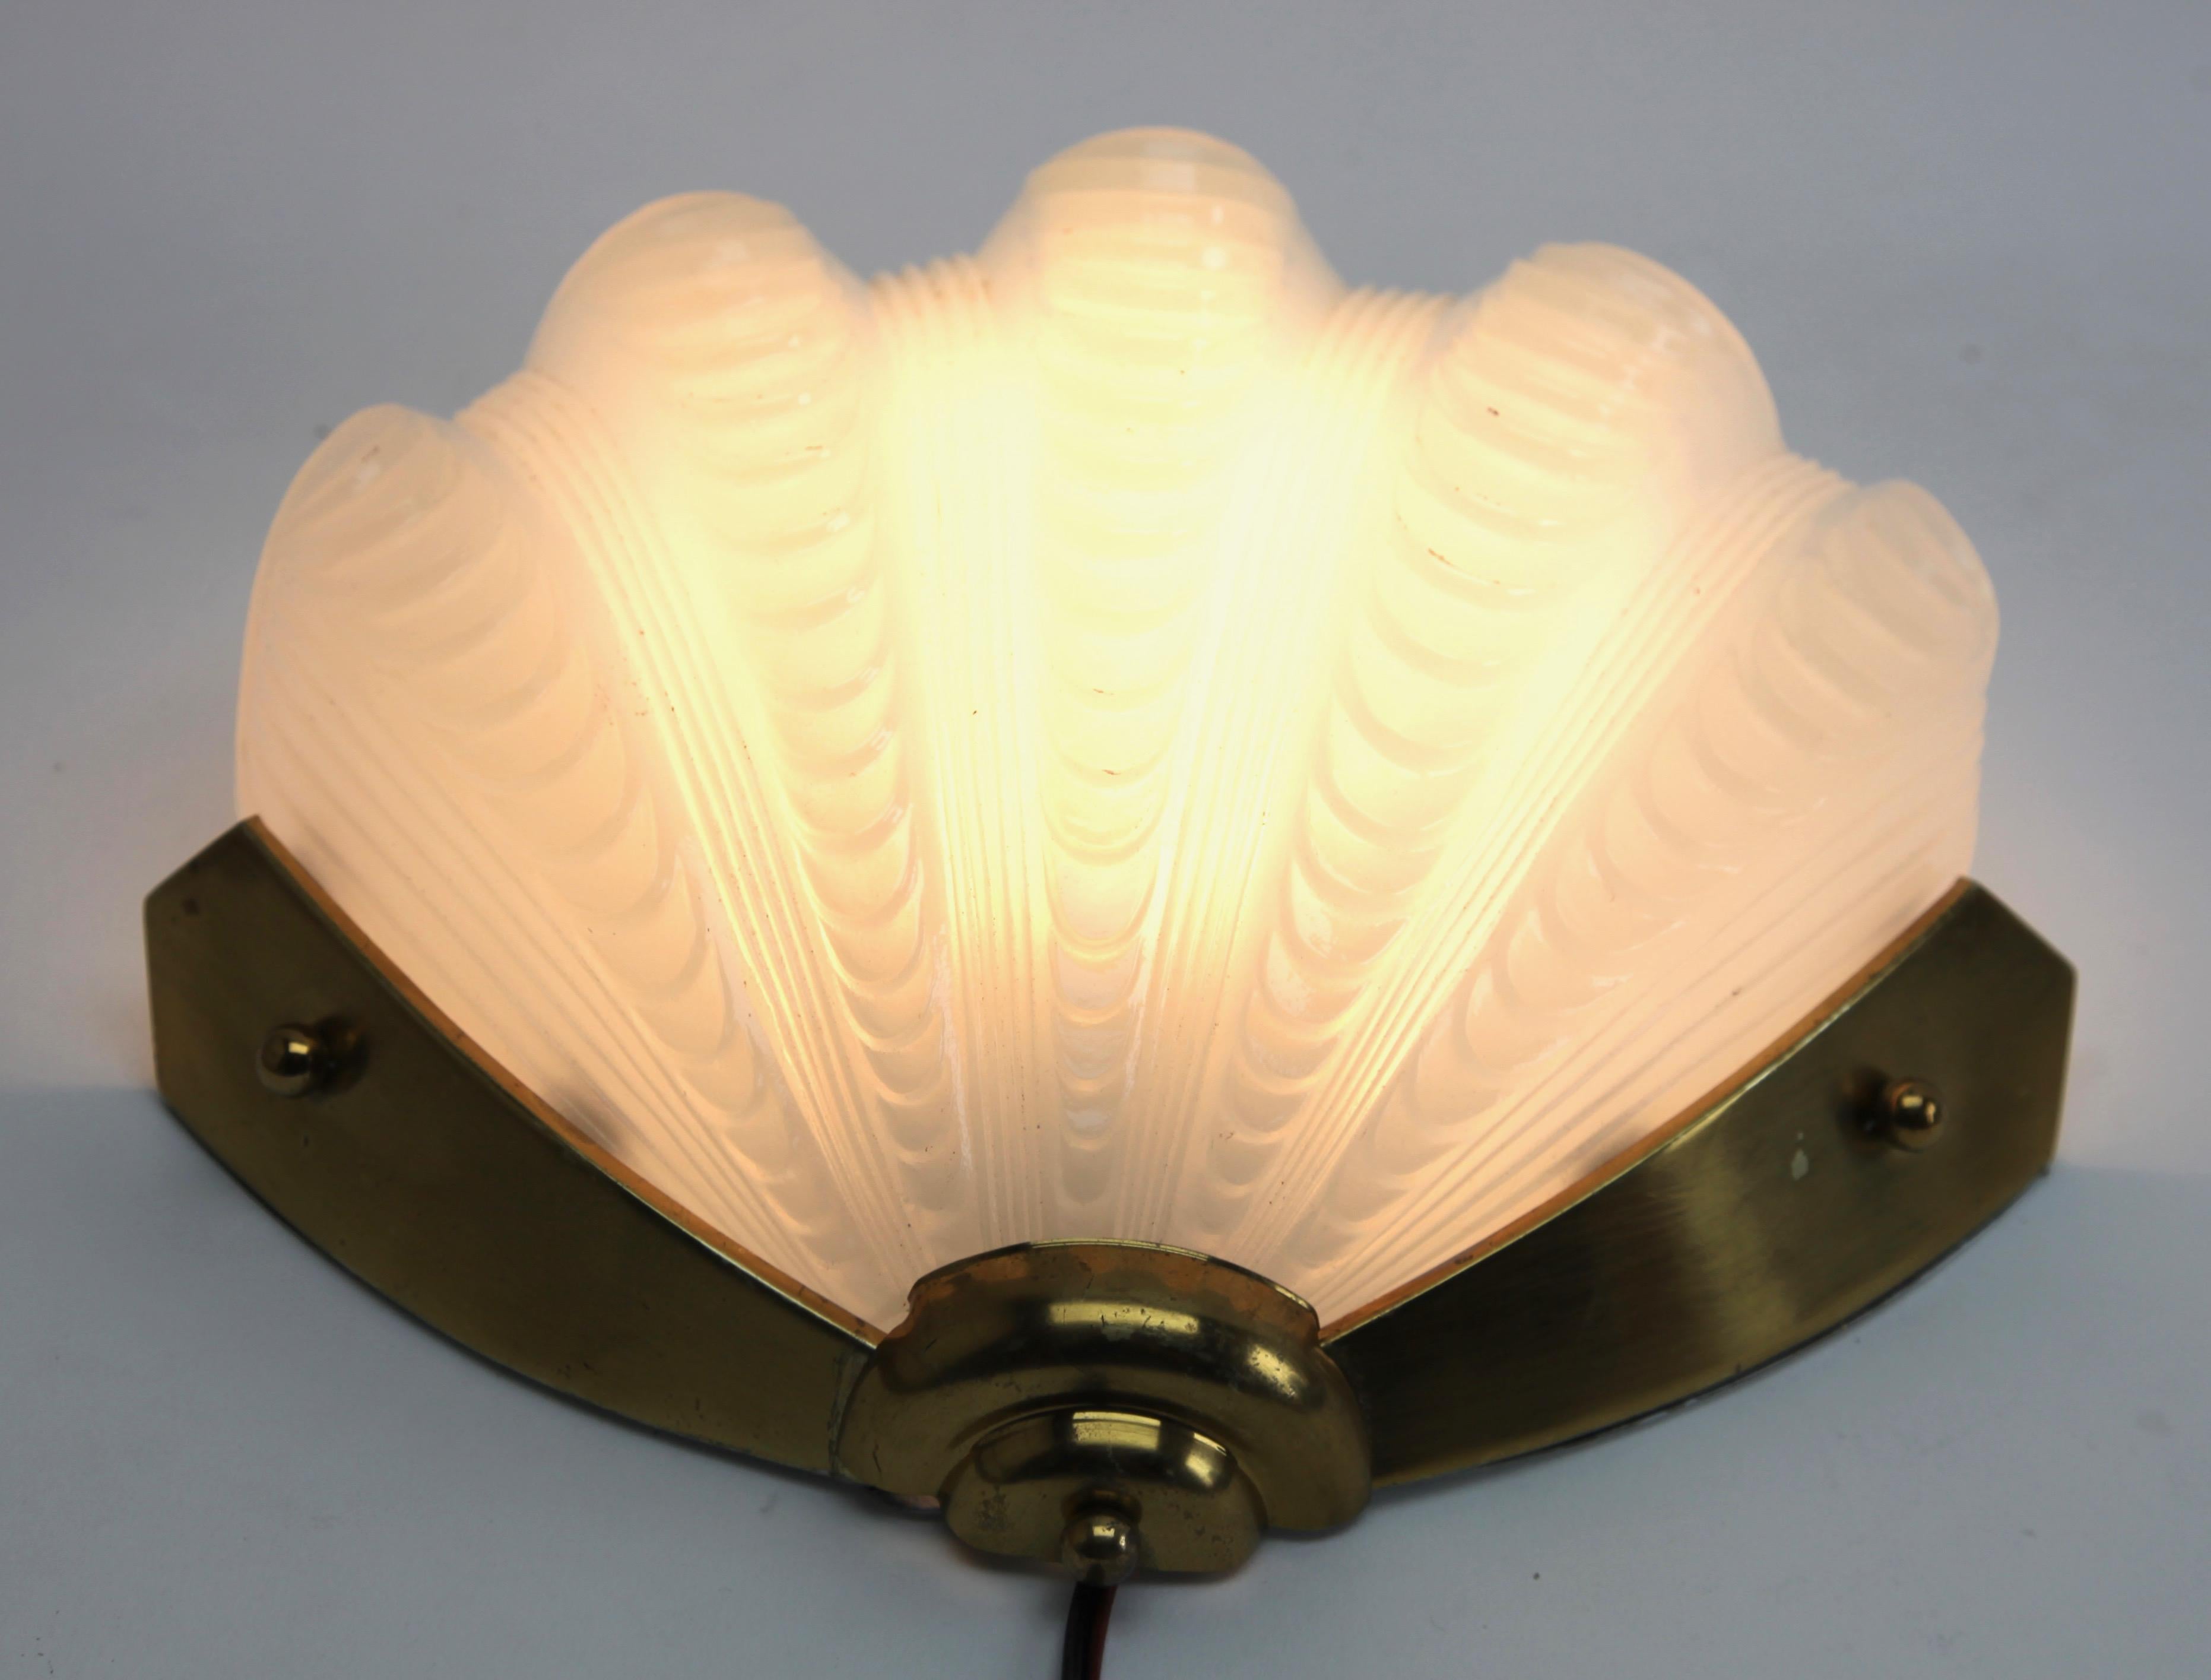 Hand-Crafted Opaque Art Deco Clamshell Wall Lamp with Brass Fittings